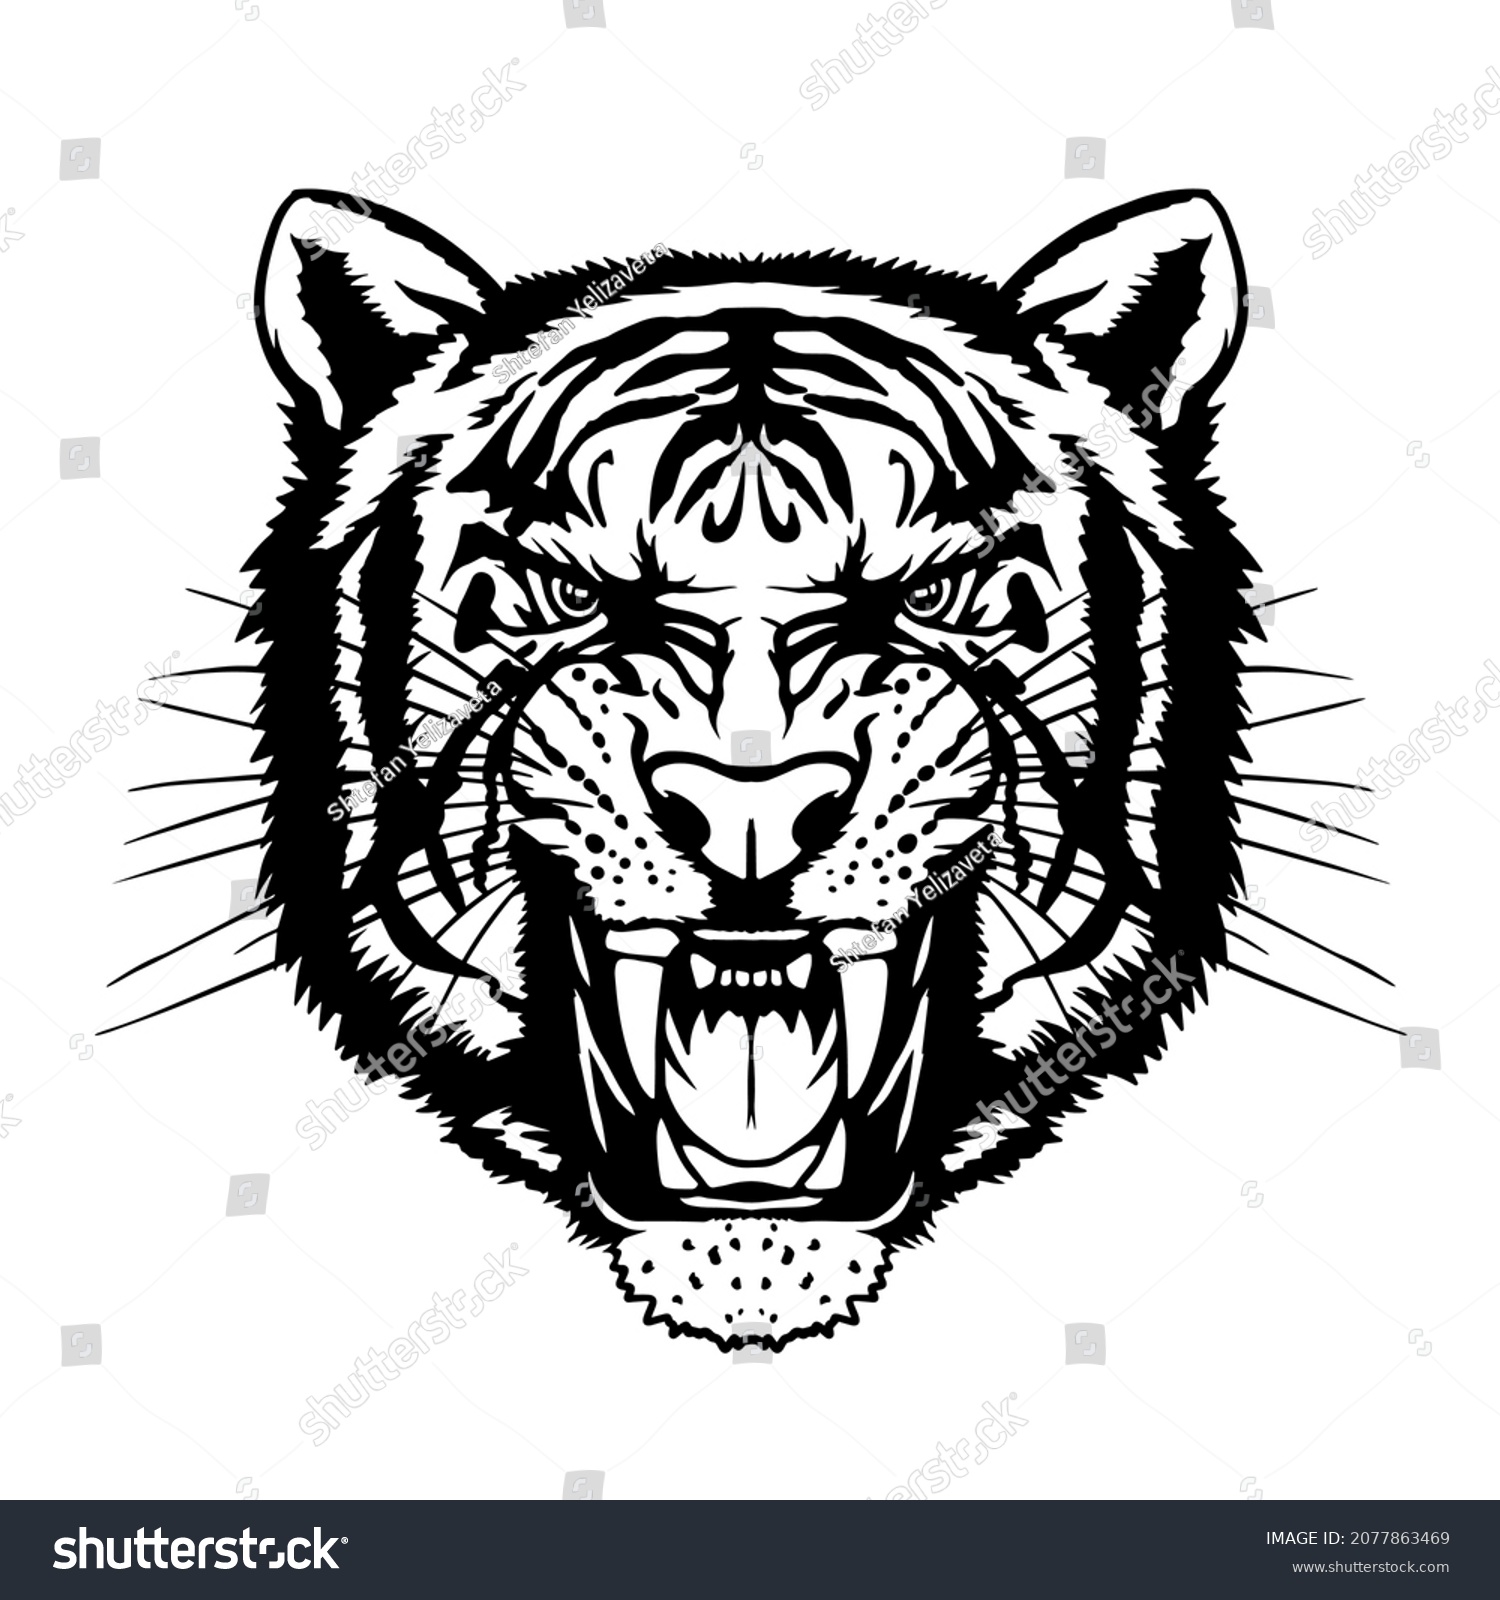 SVG of Angry tiger svg cut file. Black and white tiger head vector. Angry tiger head sport mascot logo on a white background. Vector illustration. T-shirt design. Vinyl decal for plotter svg